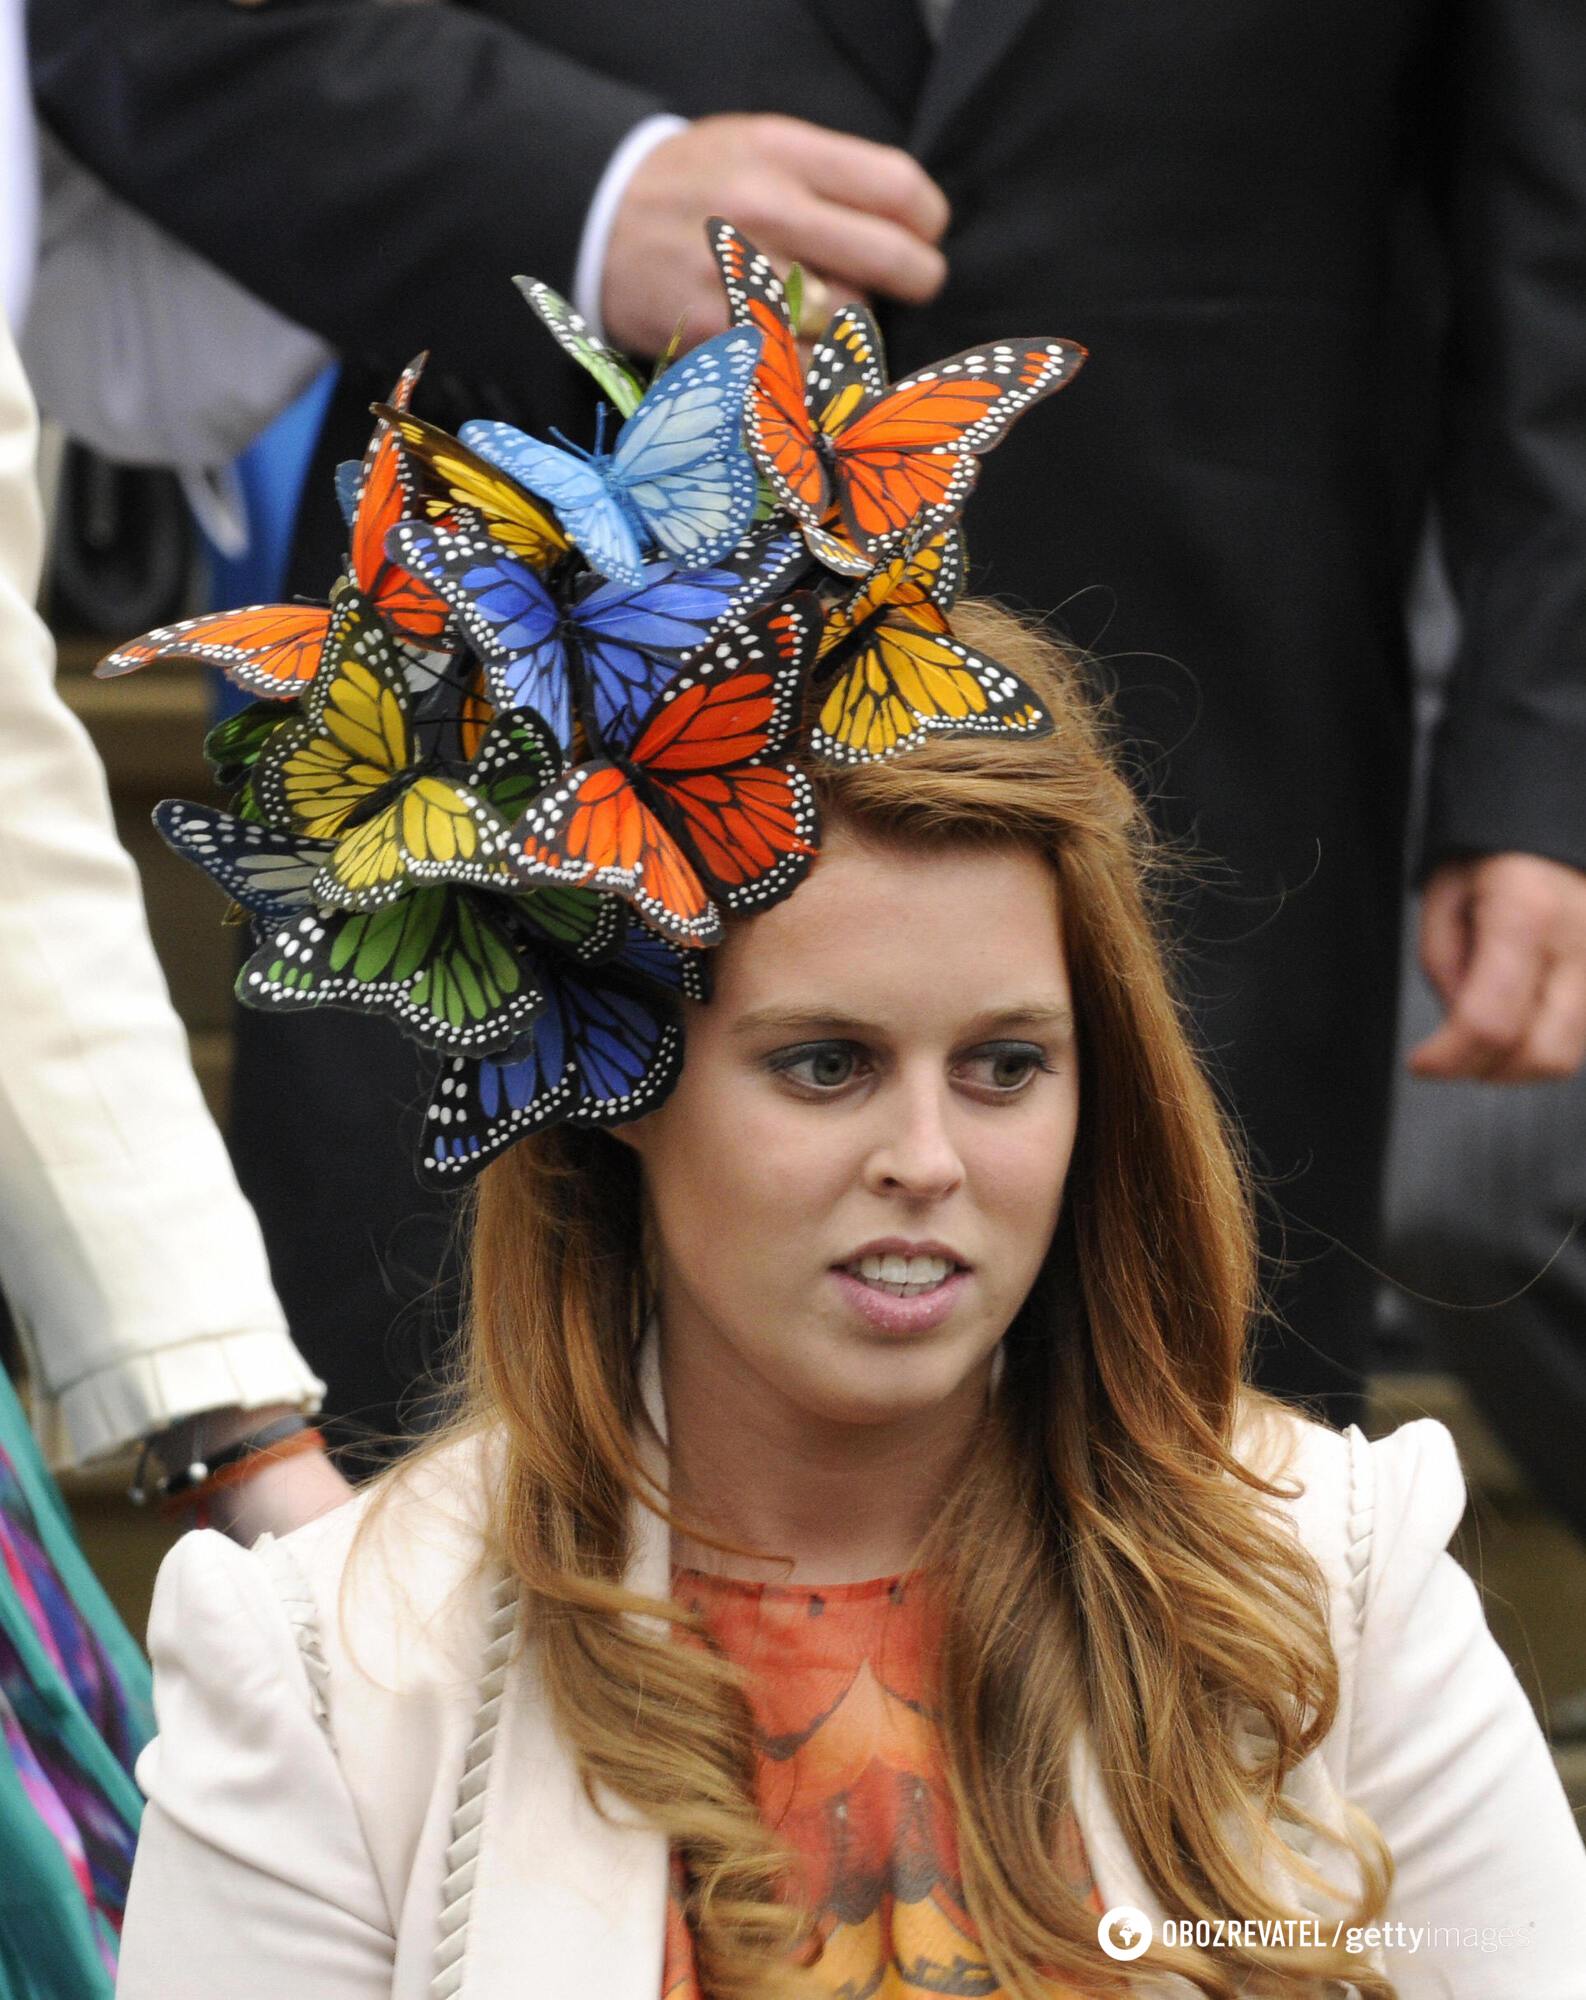 How Princess Beatrice turned from a ''laughingstock'' to a real fashion icon. Photos before and after